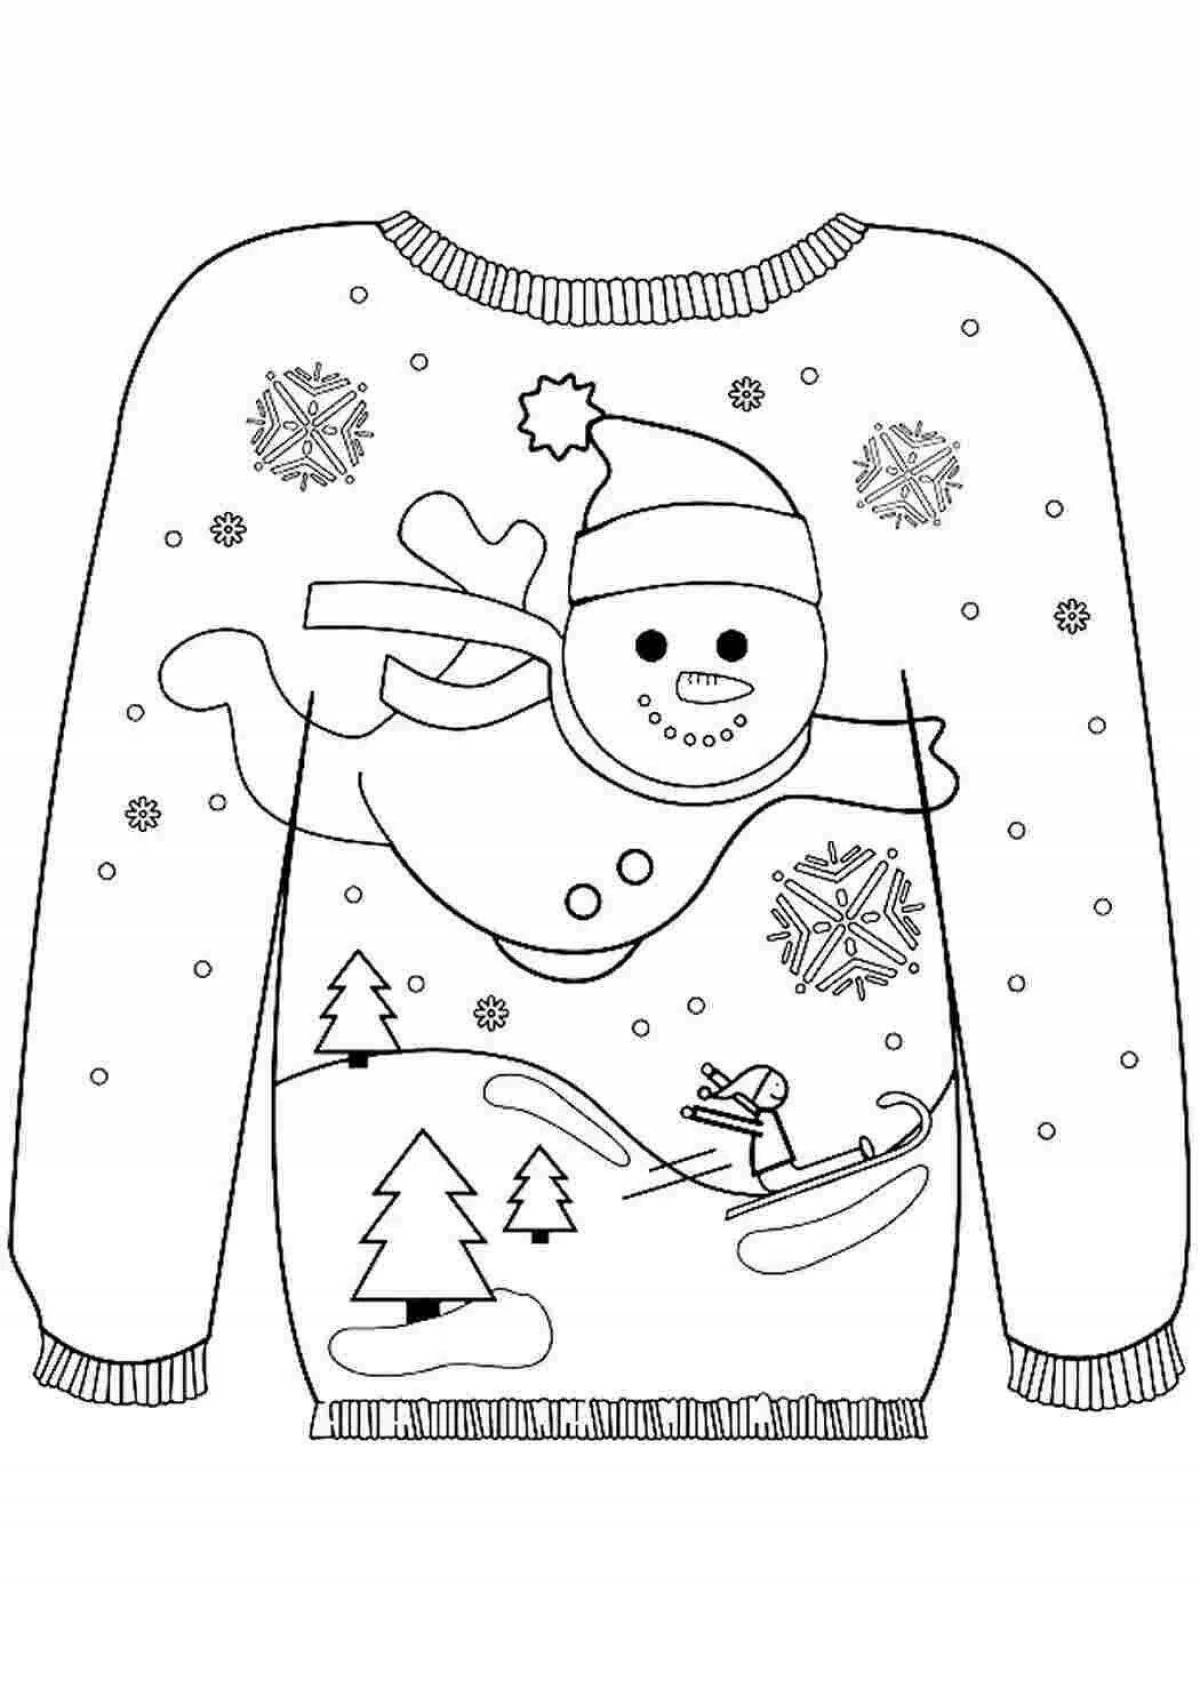 Coloring book with cute winter clothes for children 6-7 years old